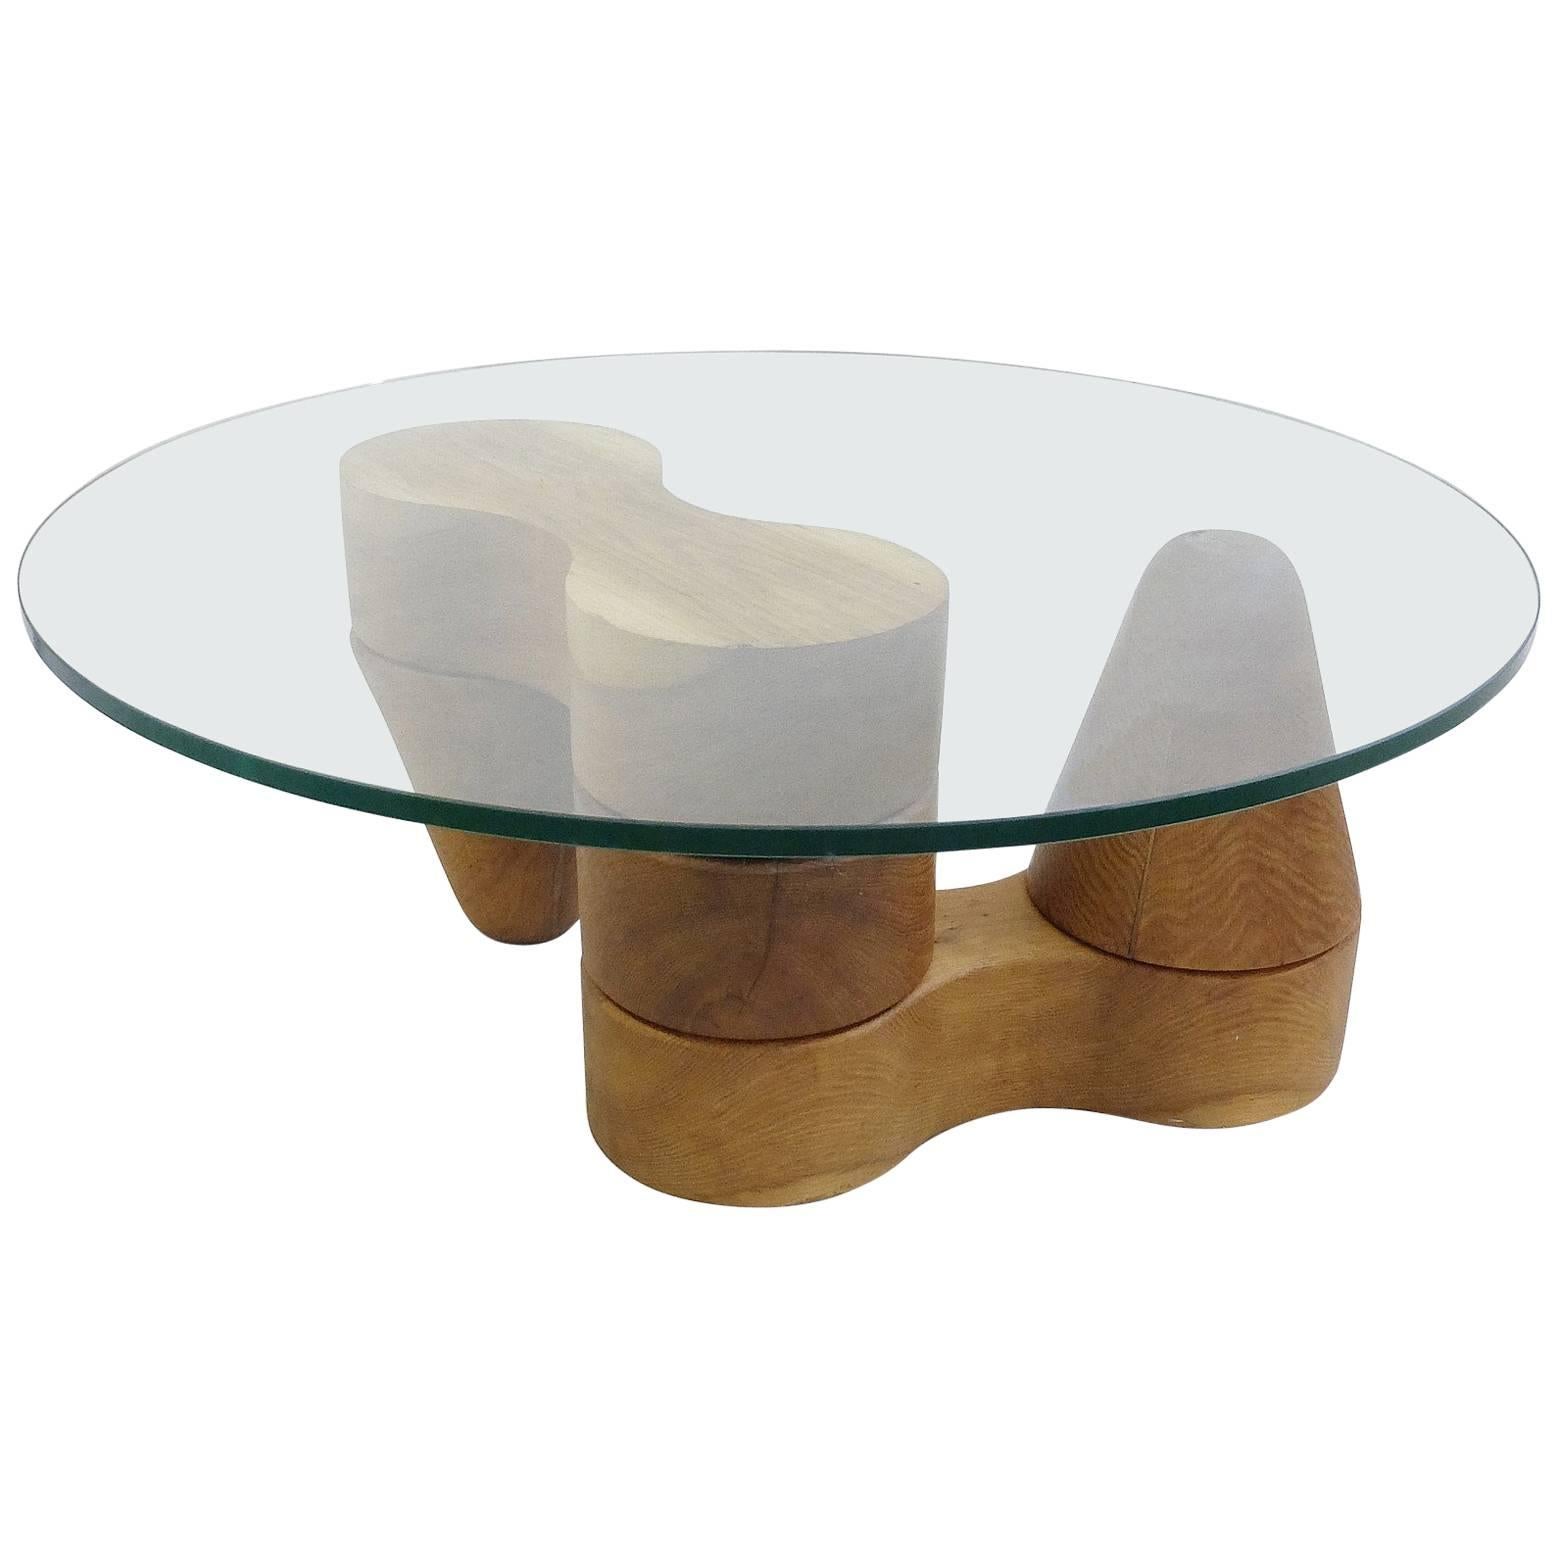 Solid Wood Coffee Table with Glass Round Top, Mid-20th Century